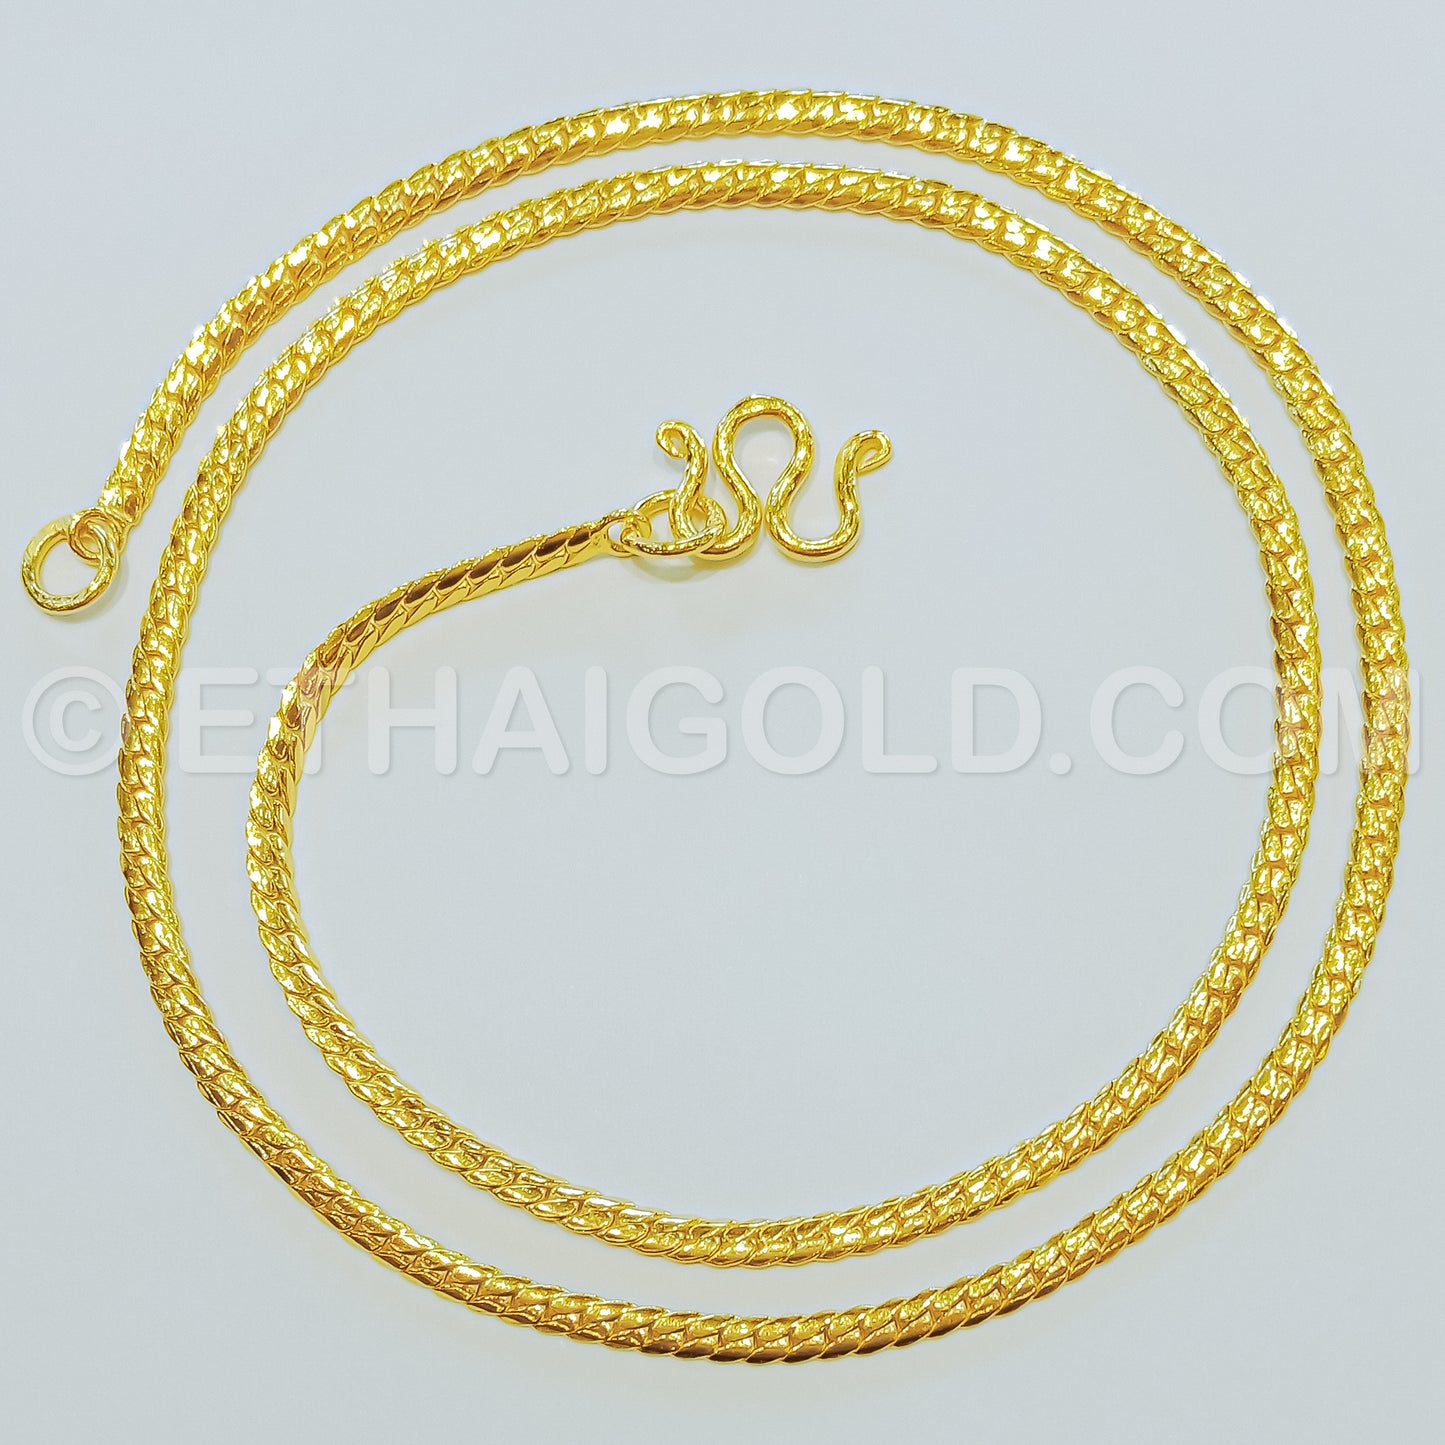 2 BAHT POLISHED SOLID DOMED CURB CHAIN NECKLACE IN 23K GOLD (ID: N0602B)